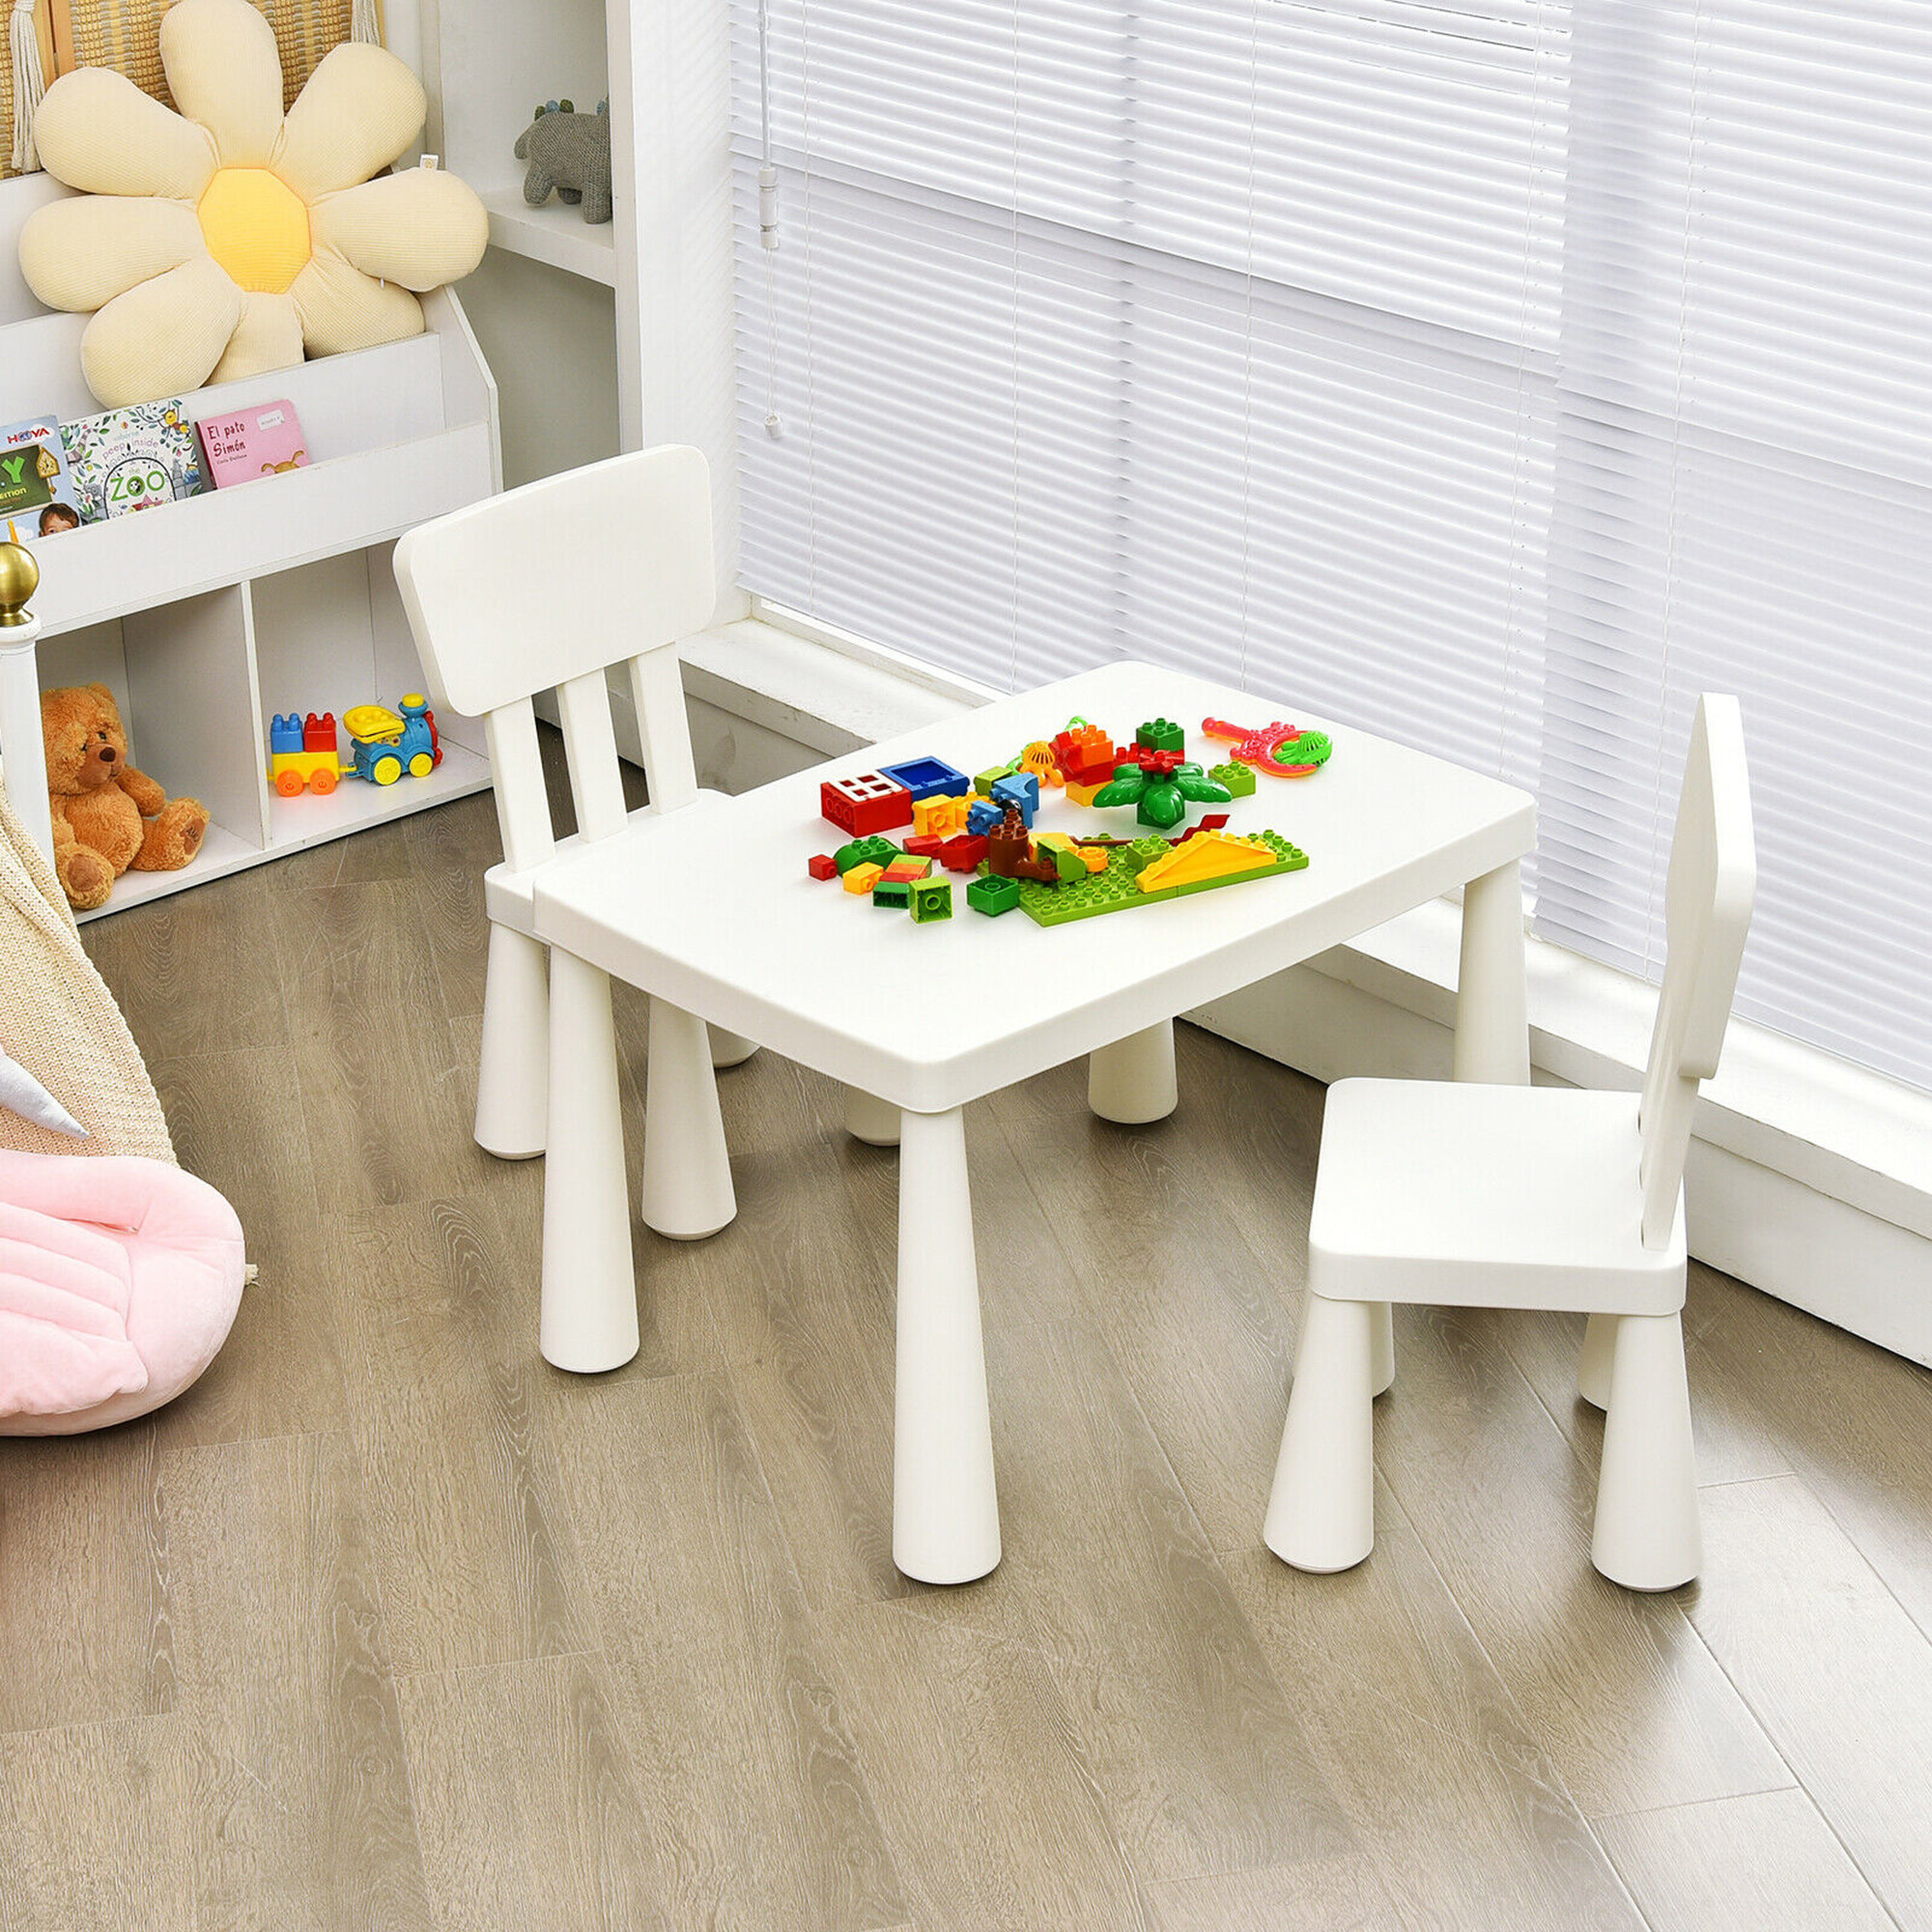 Kids Desk and Chairs, Gifts for Kids, Montessori Furniture, Kids